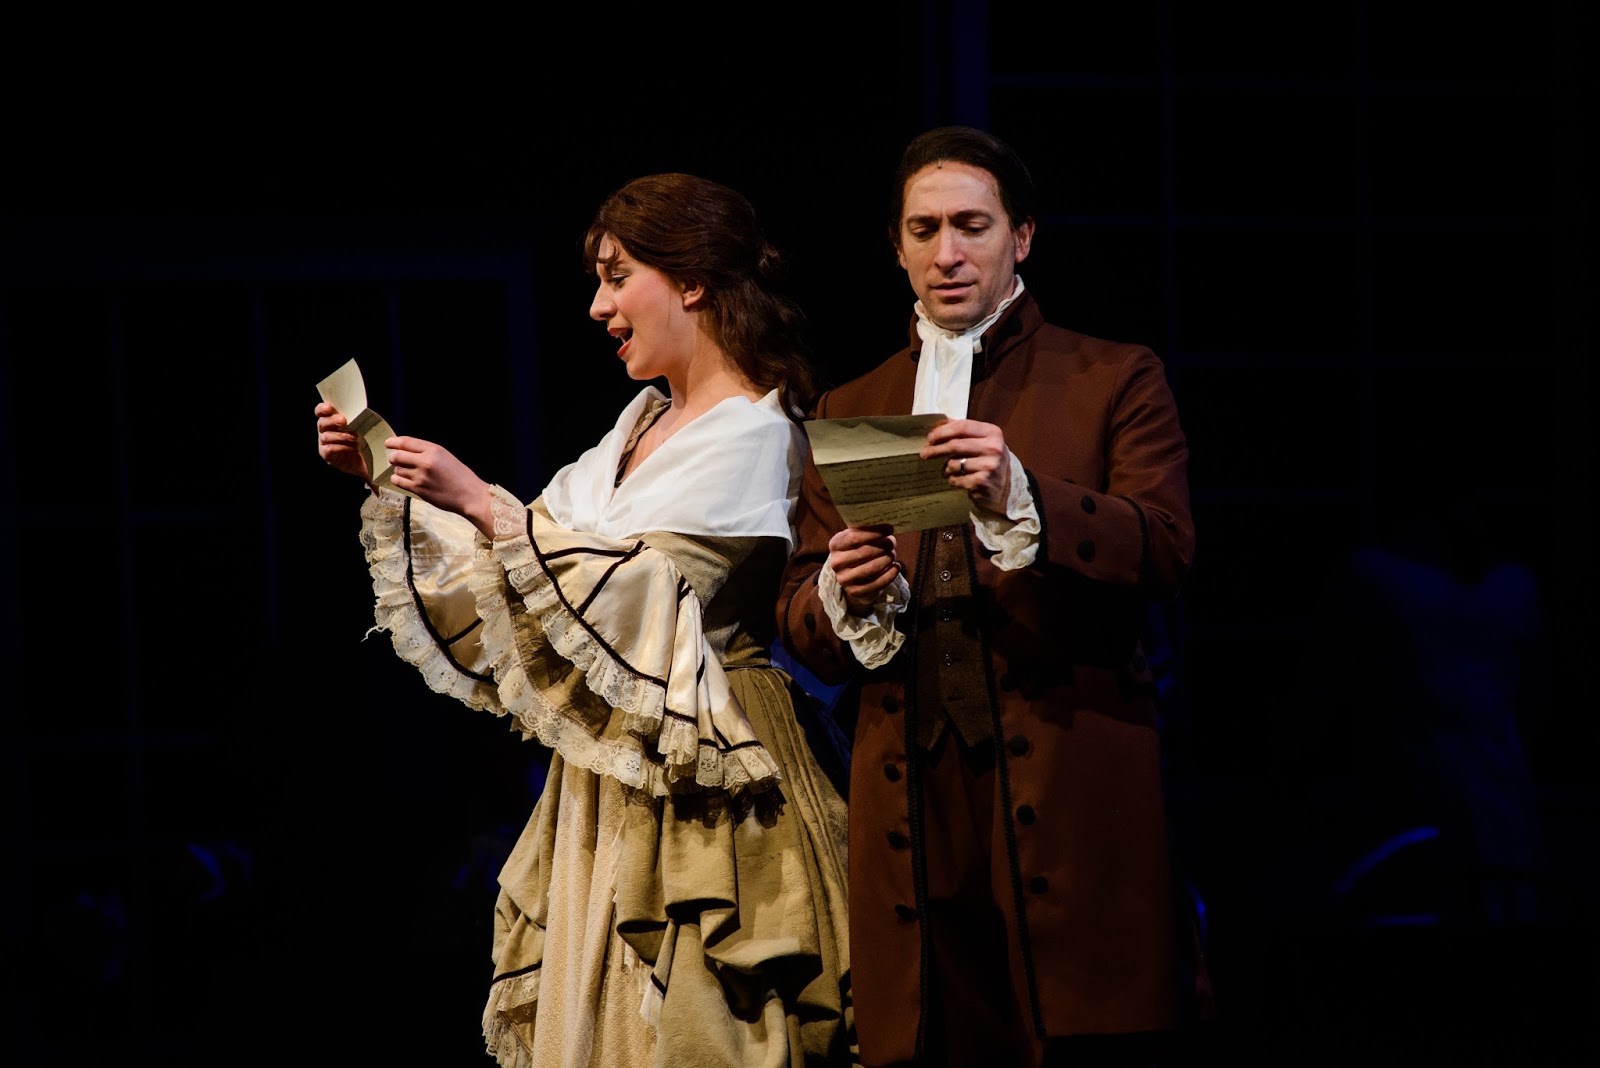 Ben Dibble as John Adams and Elyse Langley as Abigail in 1776 The Musical. Photo by Maura McConnell 